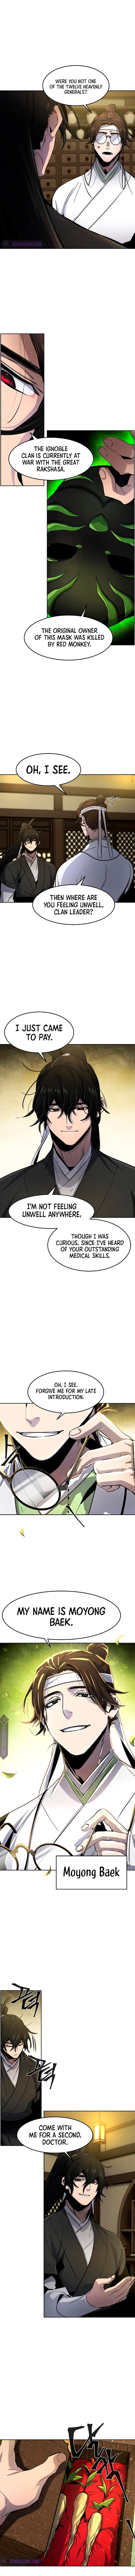 the-return-of-the-crazy-demon-chap-37-6